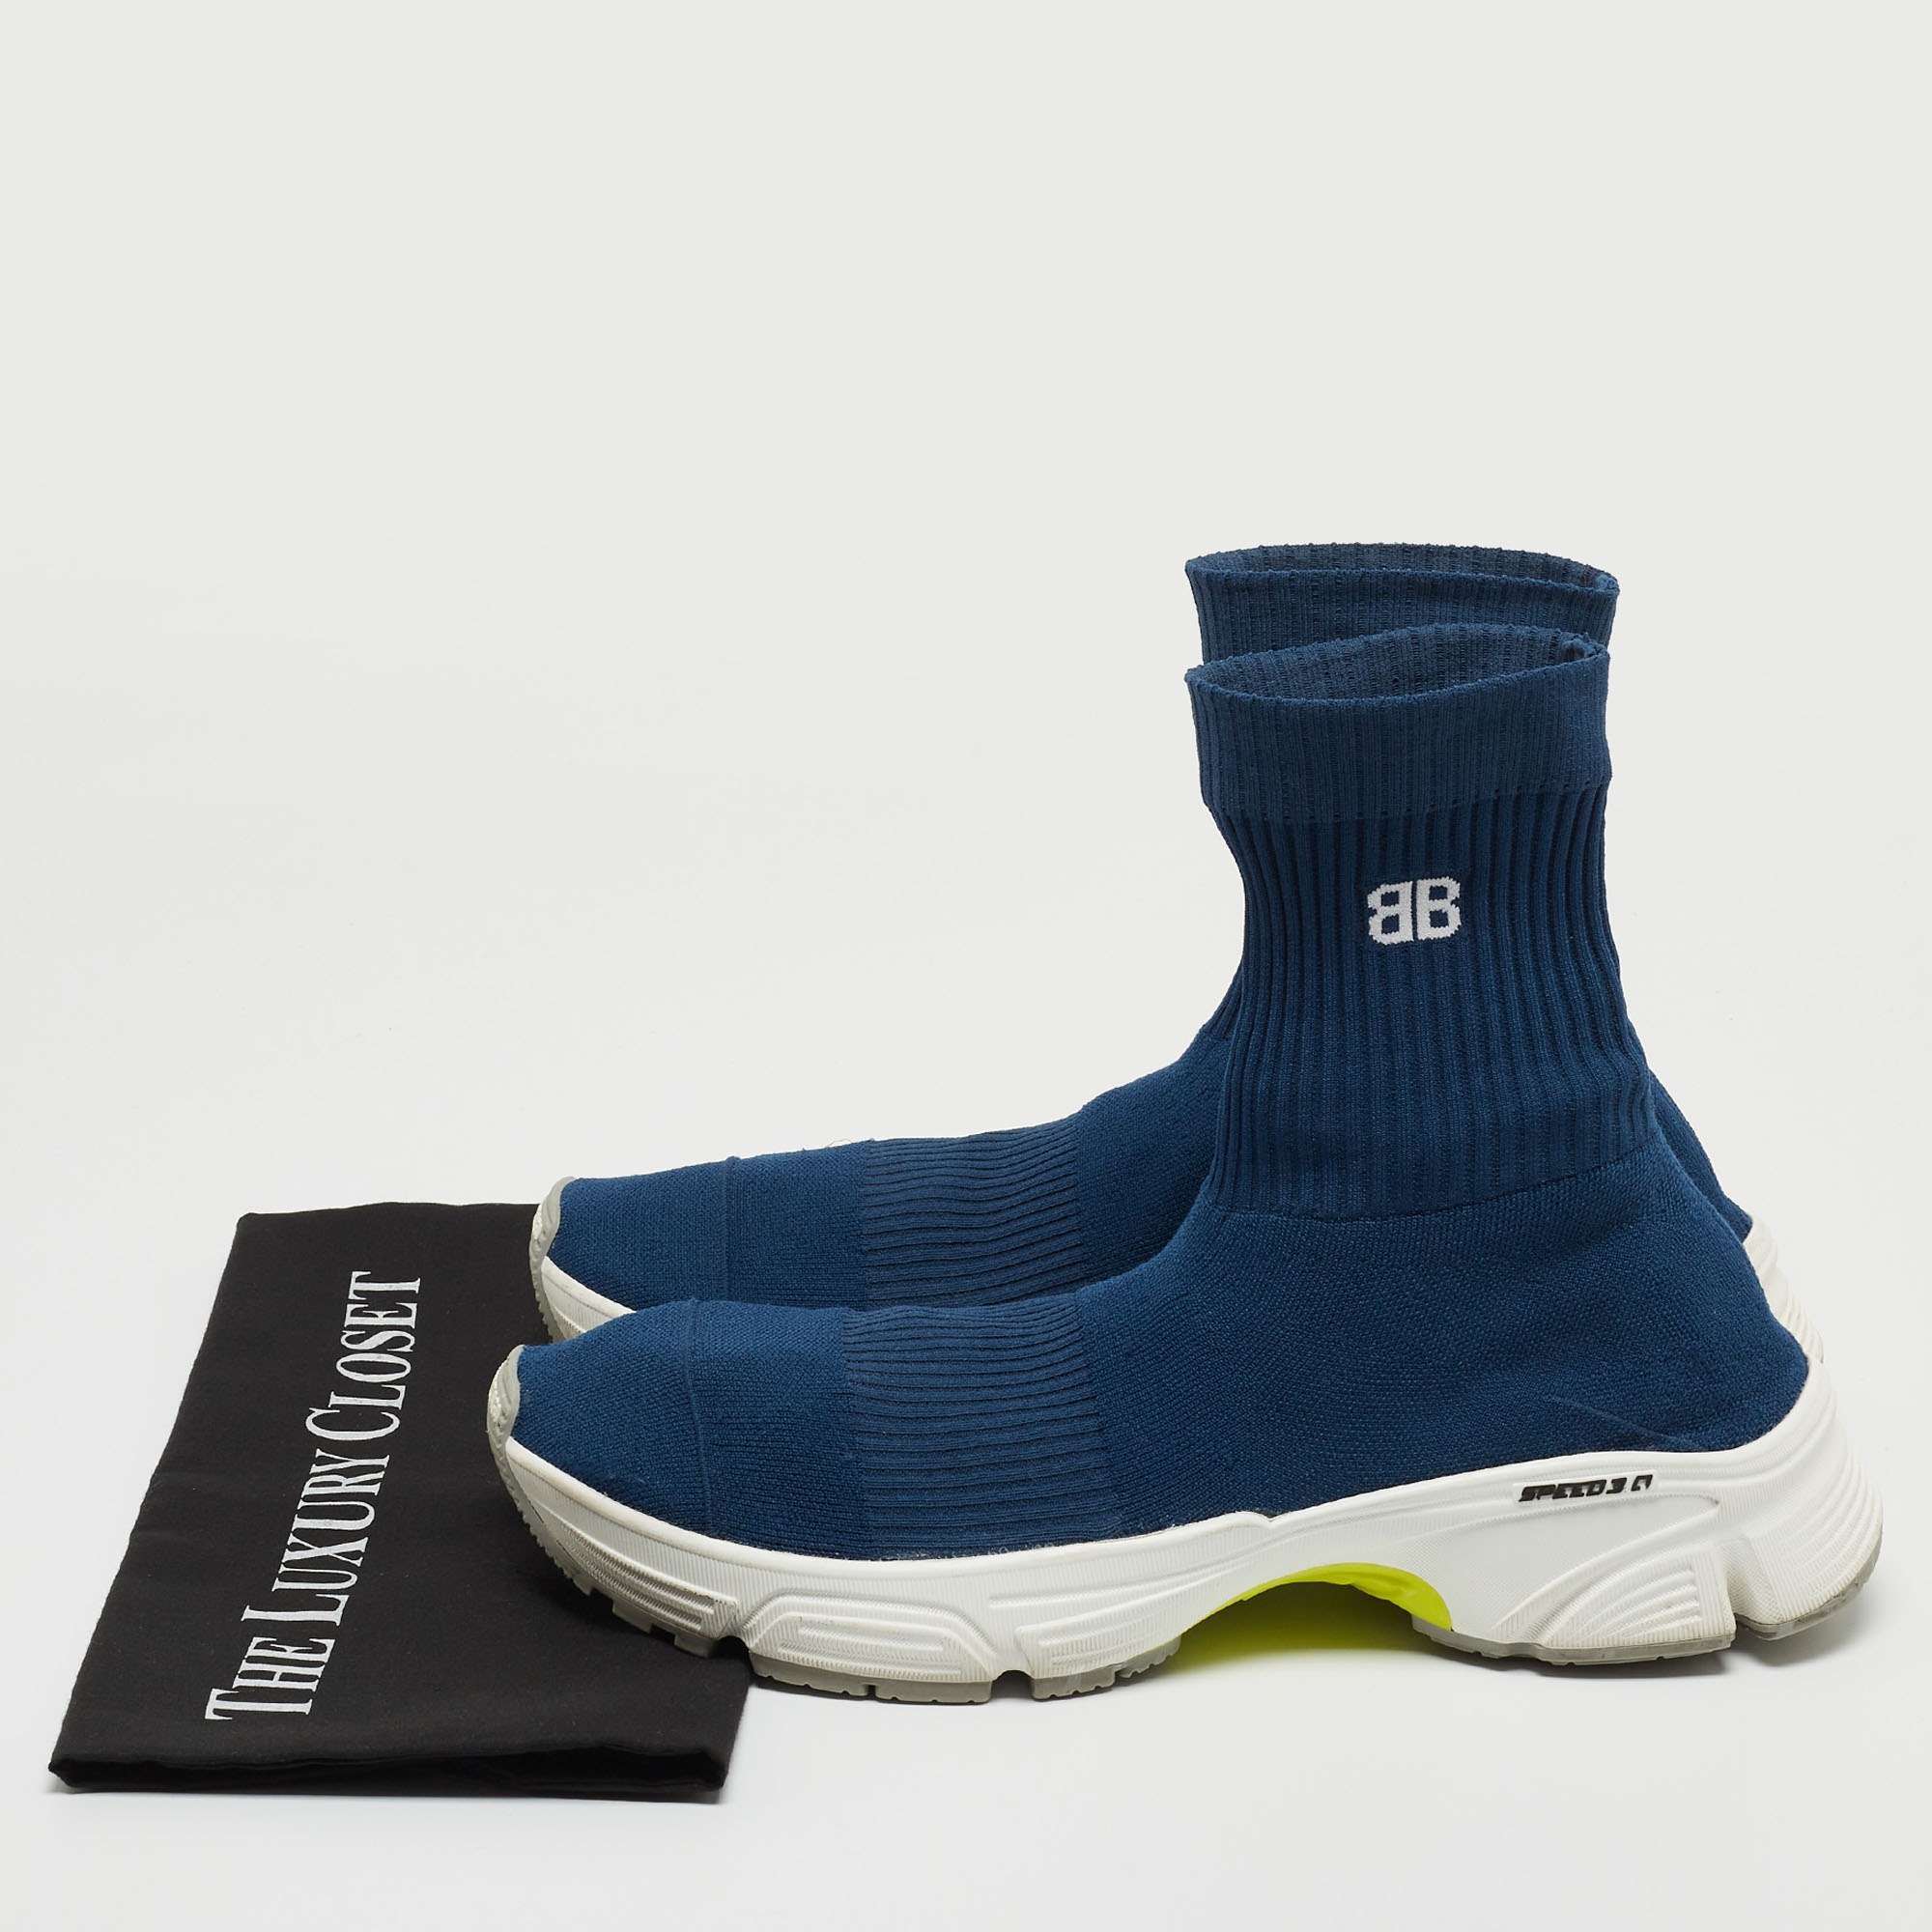 Balenciaga Blue Knit Fabric Speed Trainer Sneakers Size 43